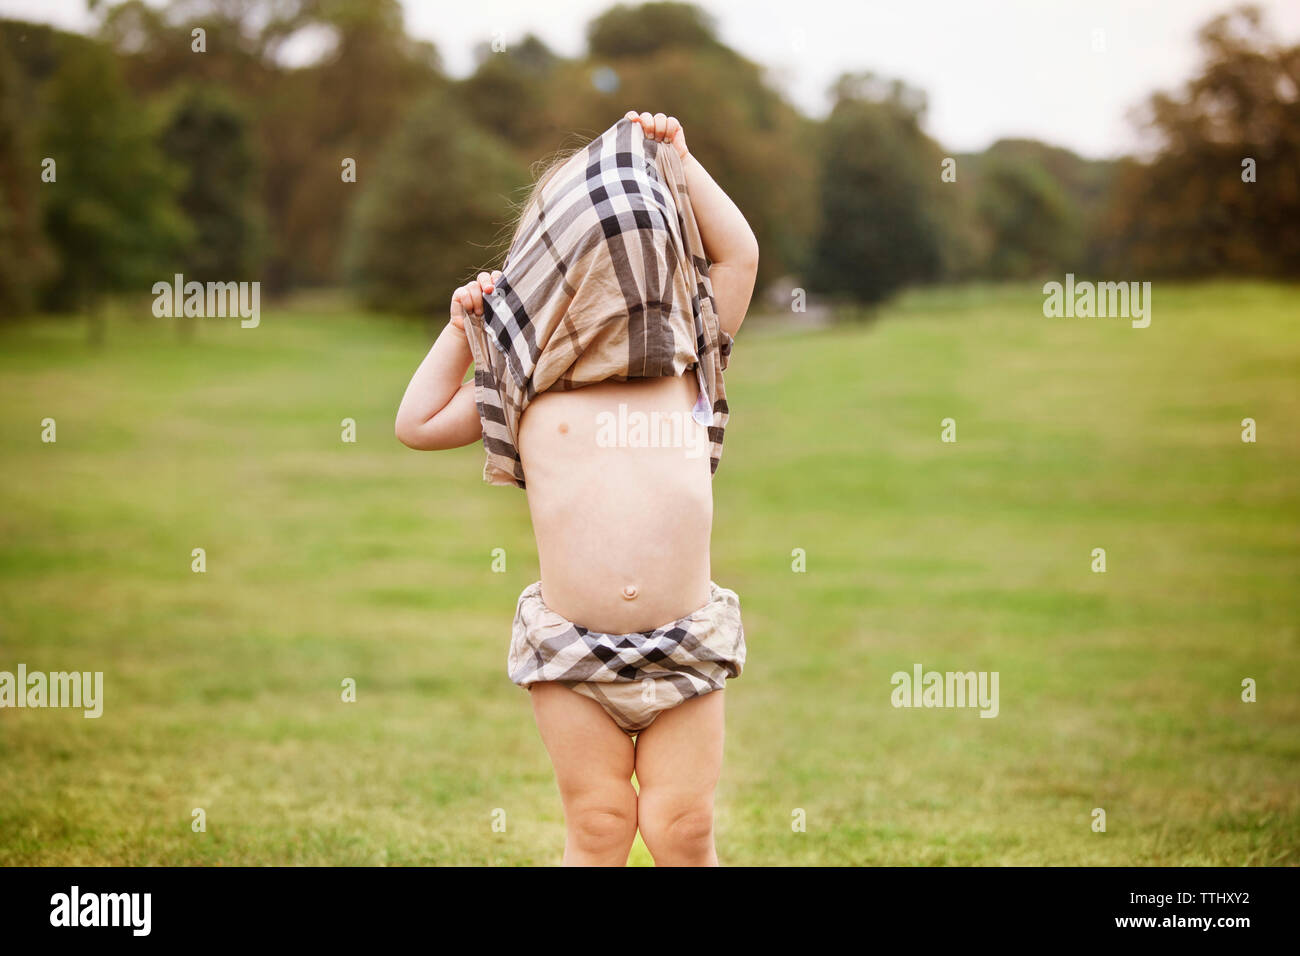 Girl covering face with dress while standing at park Stock Photo